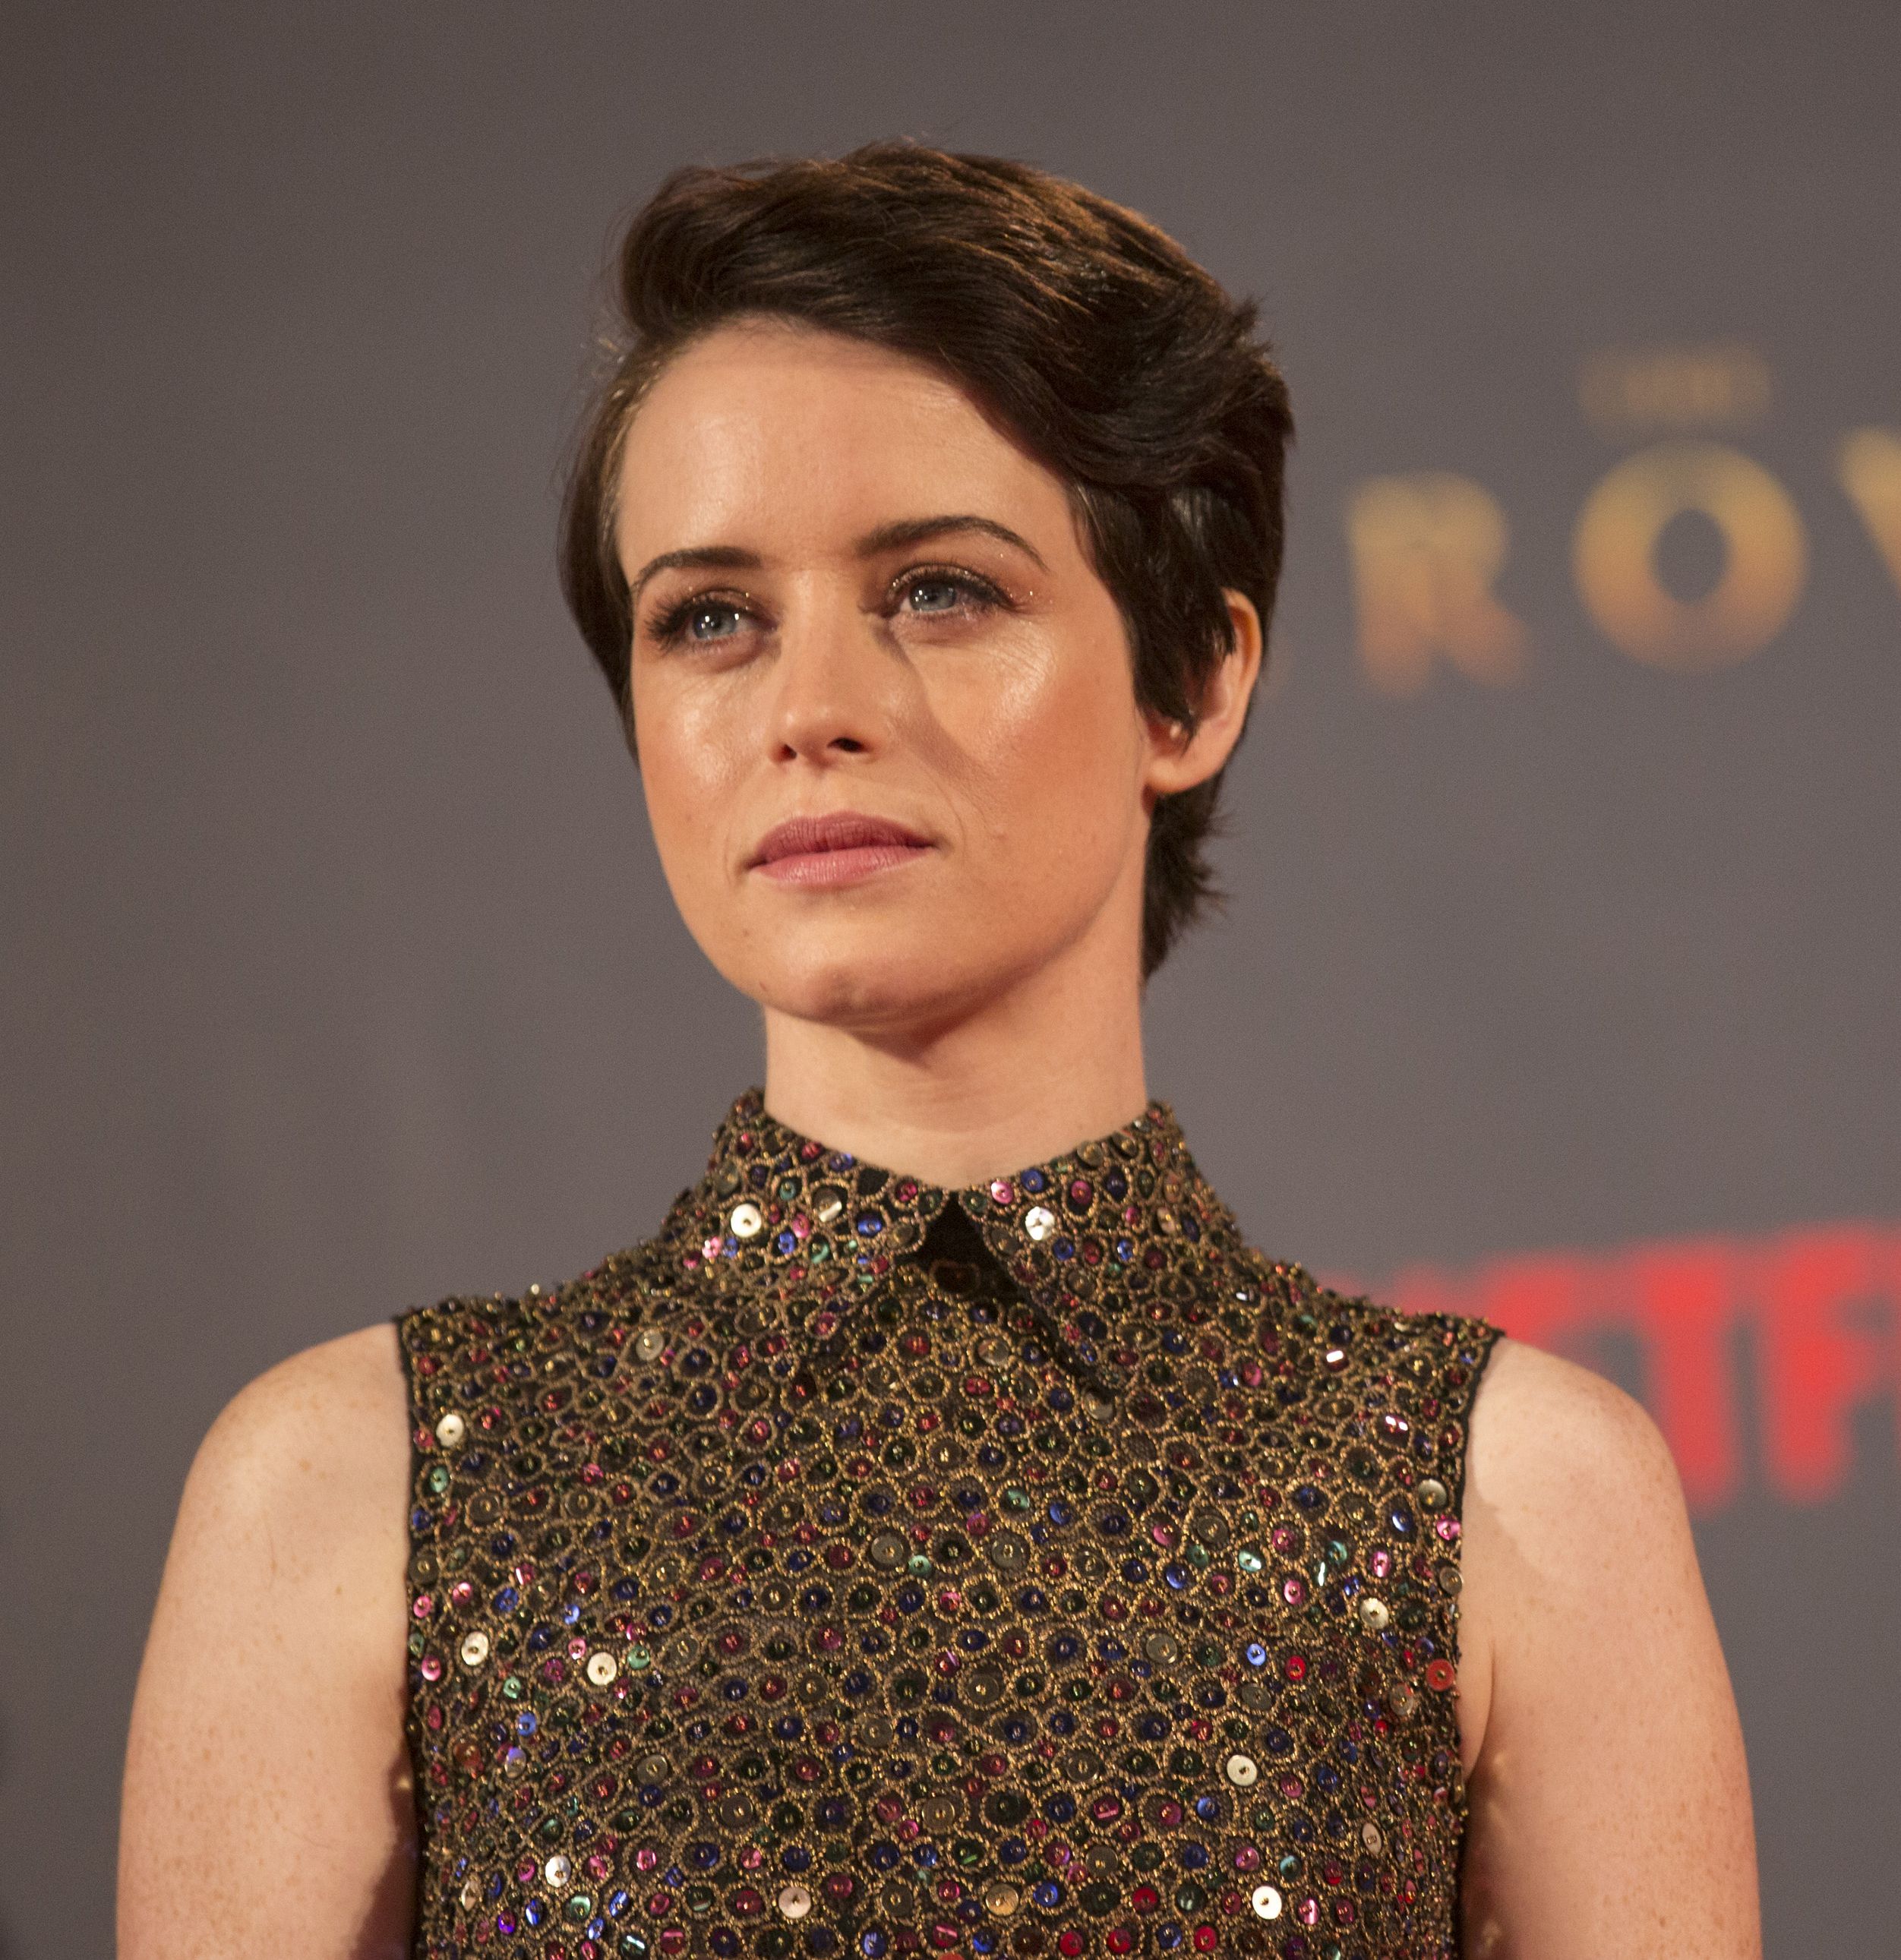 The Crown season 2 - Claire Foy and Vanessa Kirby prove they're party  dressing royalty at premiere for The Crown season 2